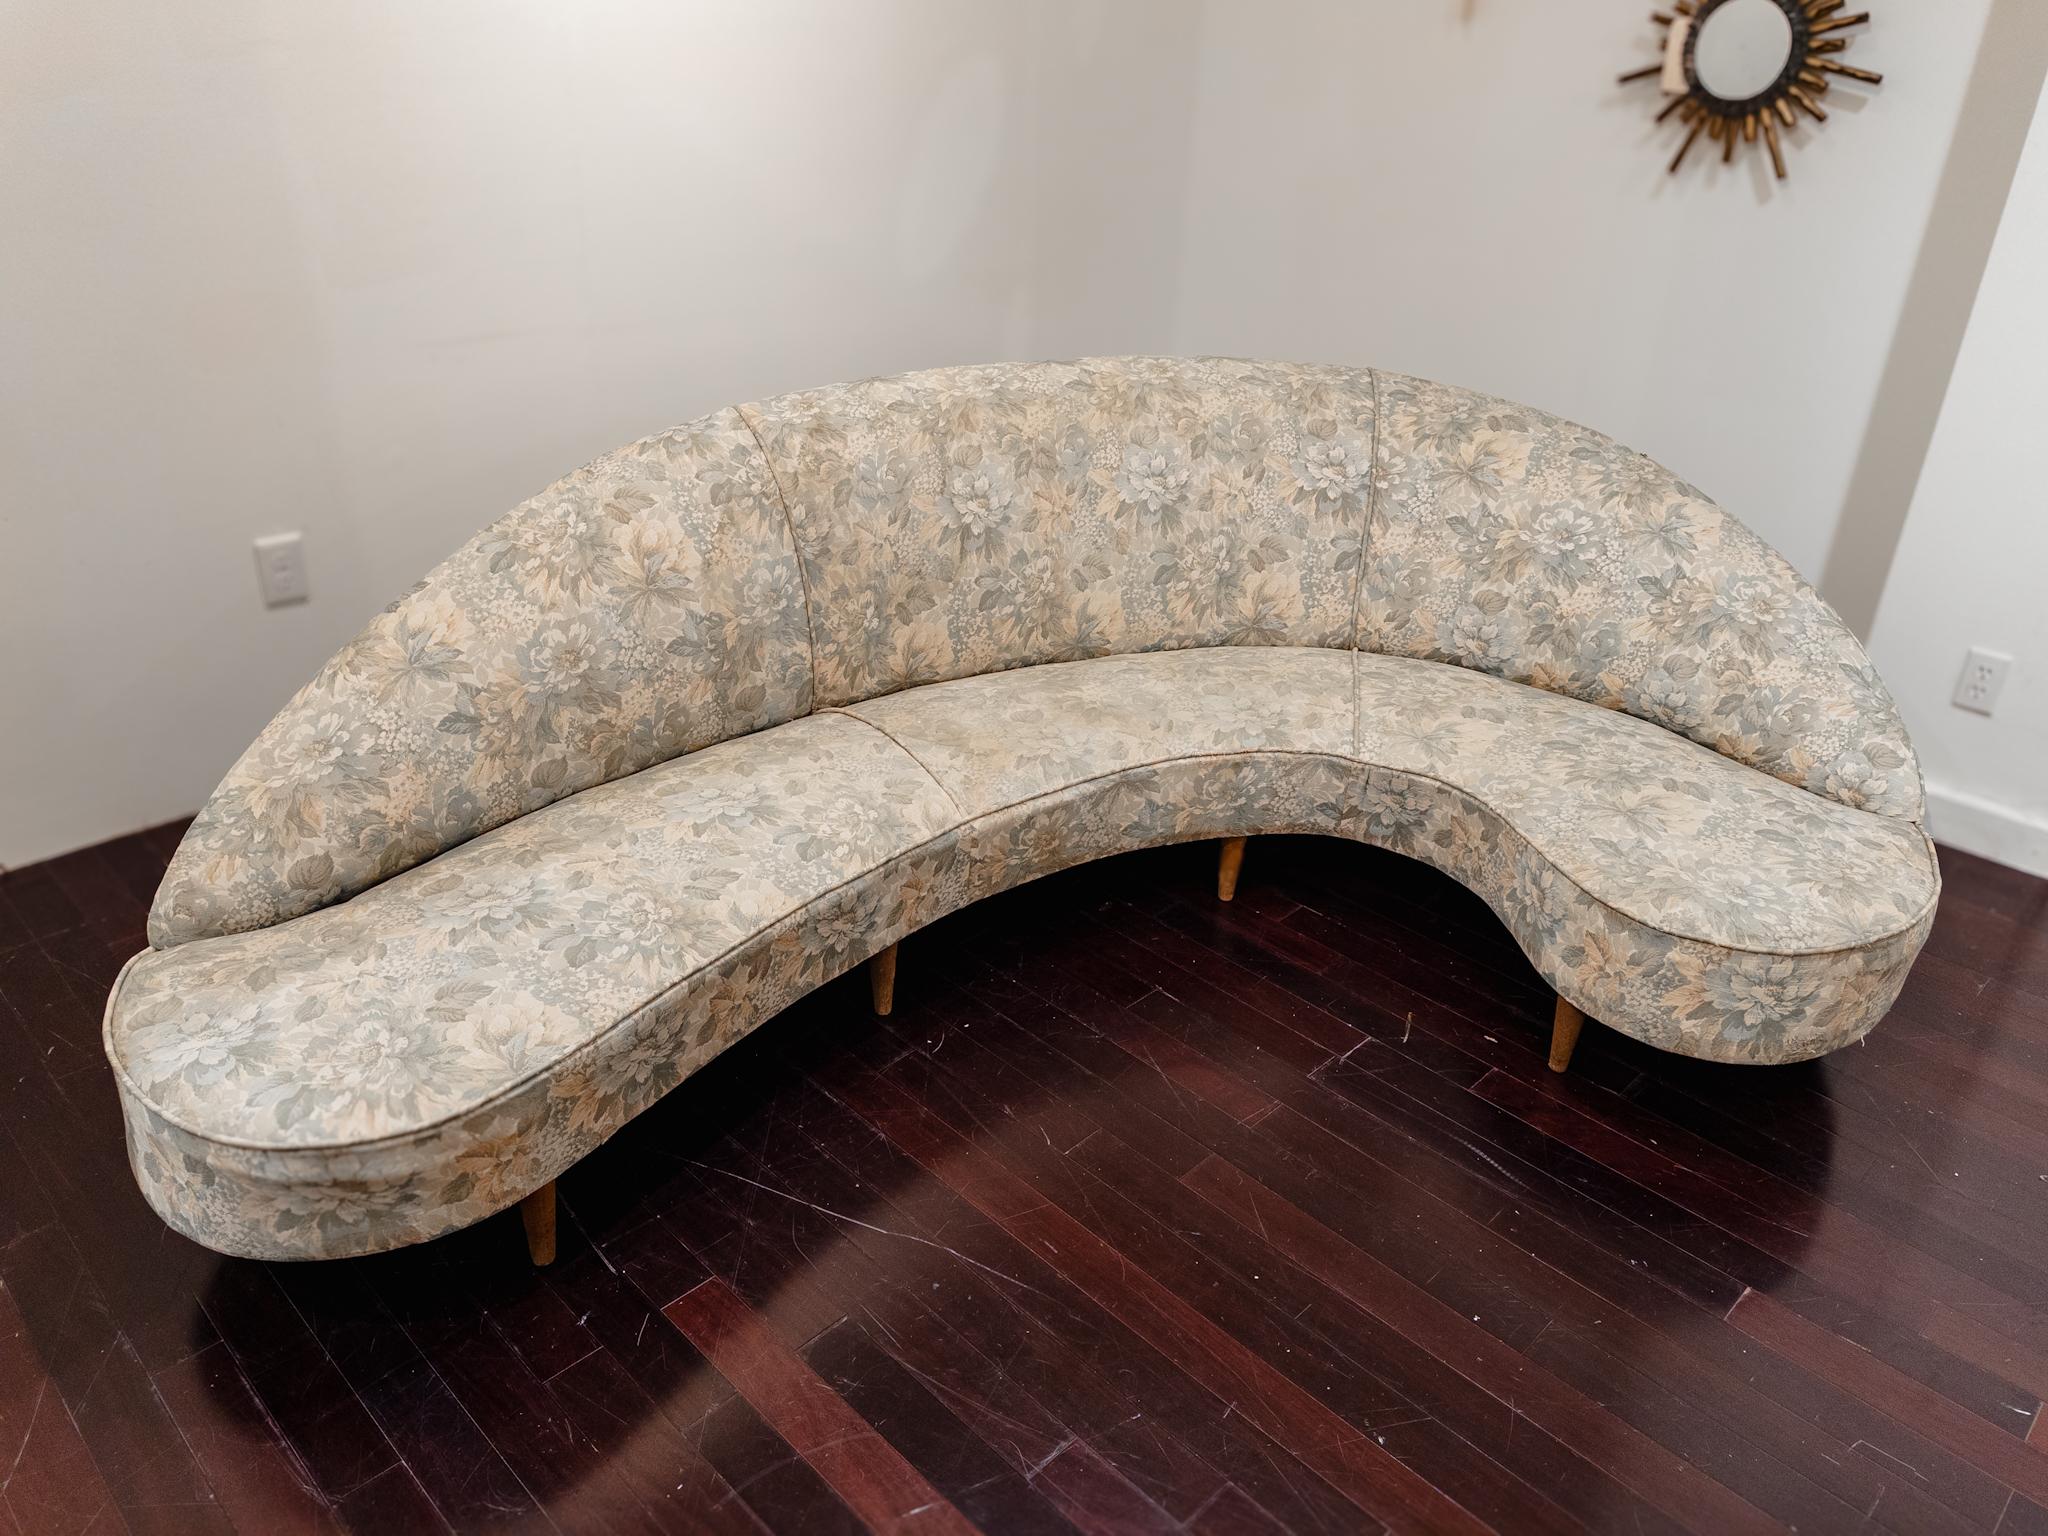 The Original Federico Munari Sofa from 1950 stands as an enduring icon of mid-century design, coveted for its timeless elegance and unmatched craftsmanship. Its sleek silhouette and luxurious brocade upholstery exude sophistication, reflecting